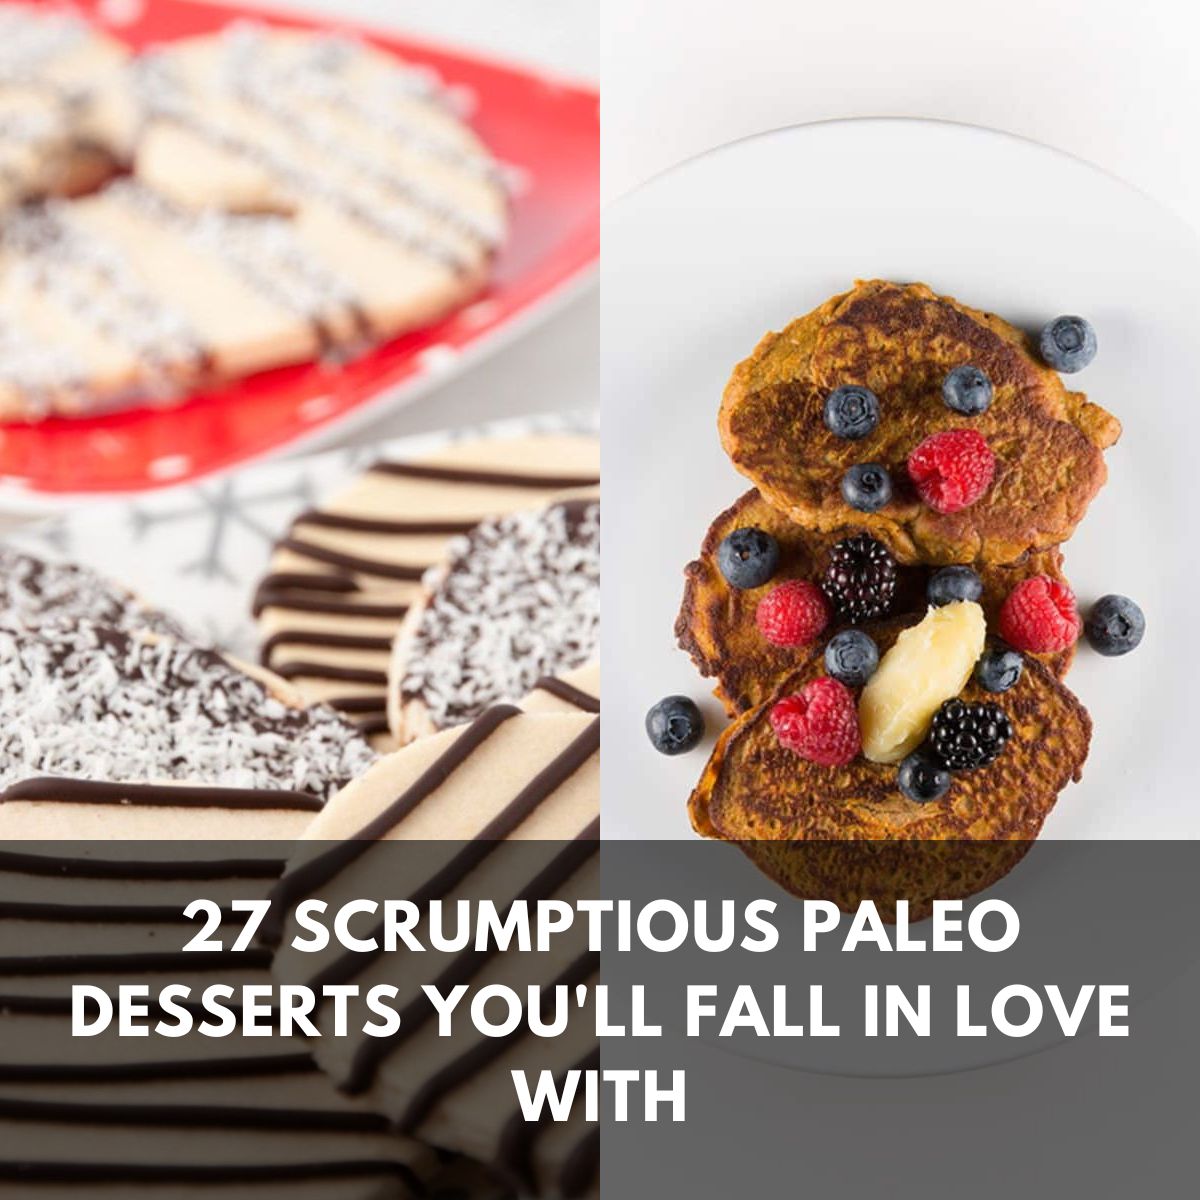 27 scrumptious paleo desserts youll fall in love with main